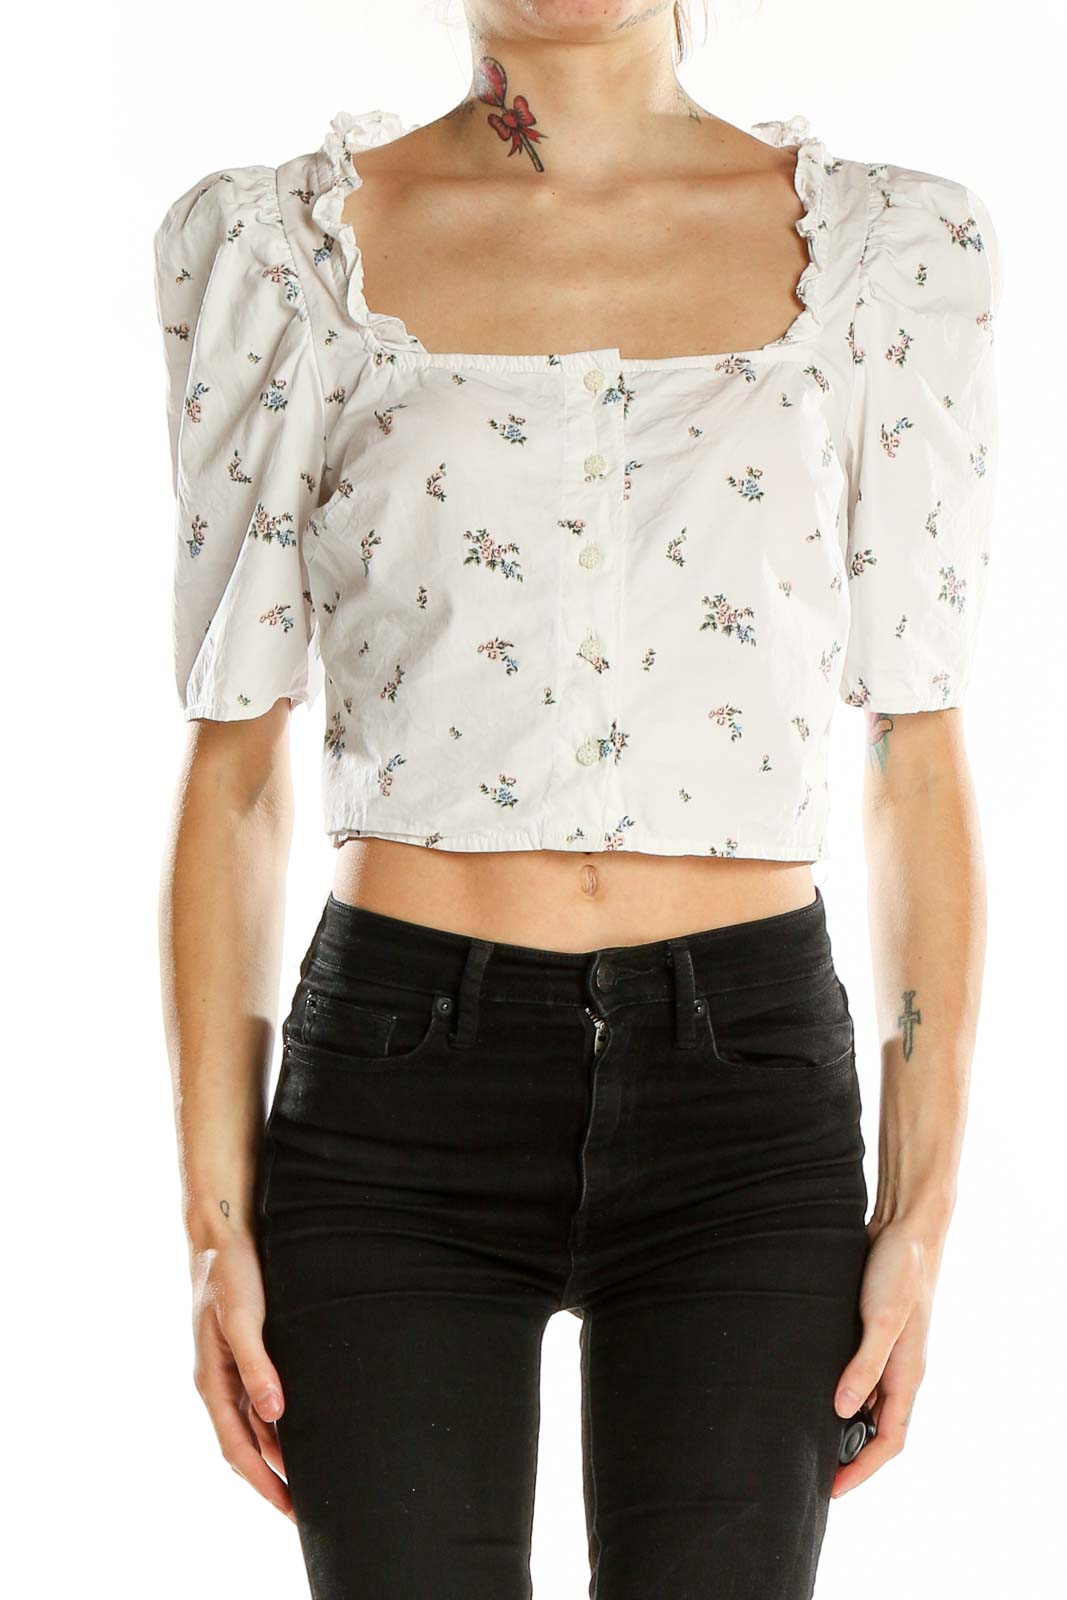 White Square Neck Floral Print Crop Top Front